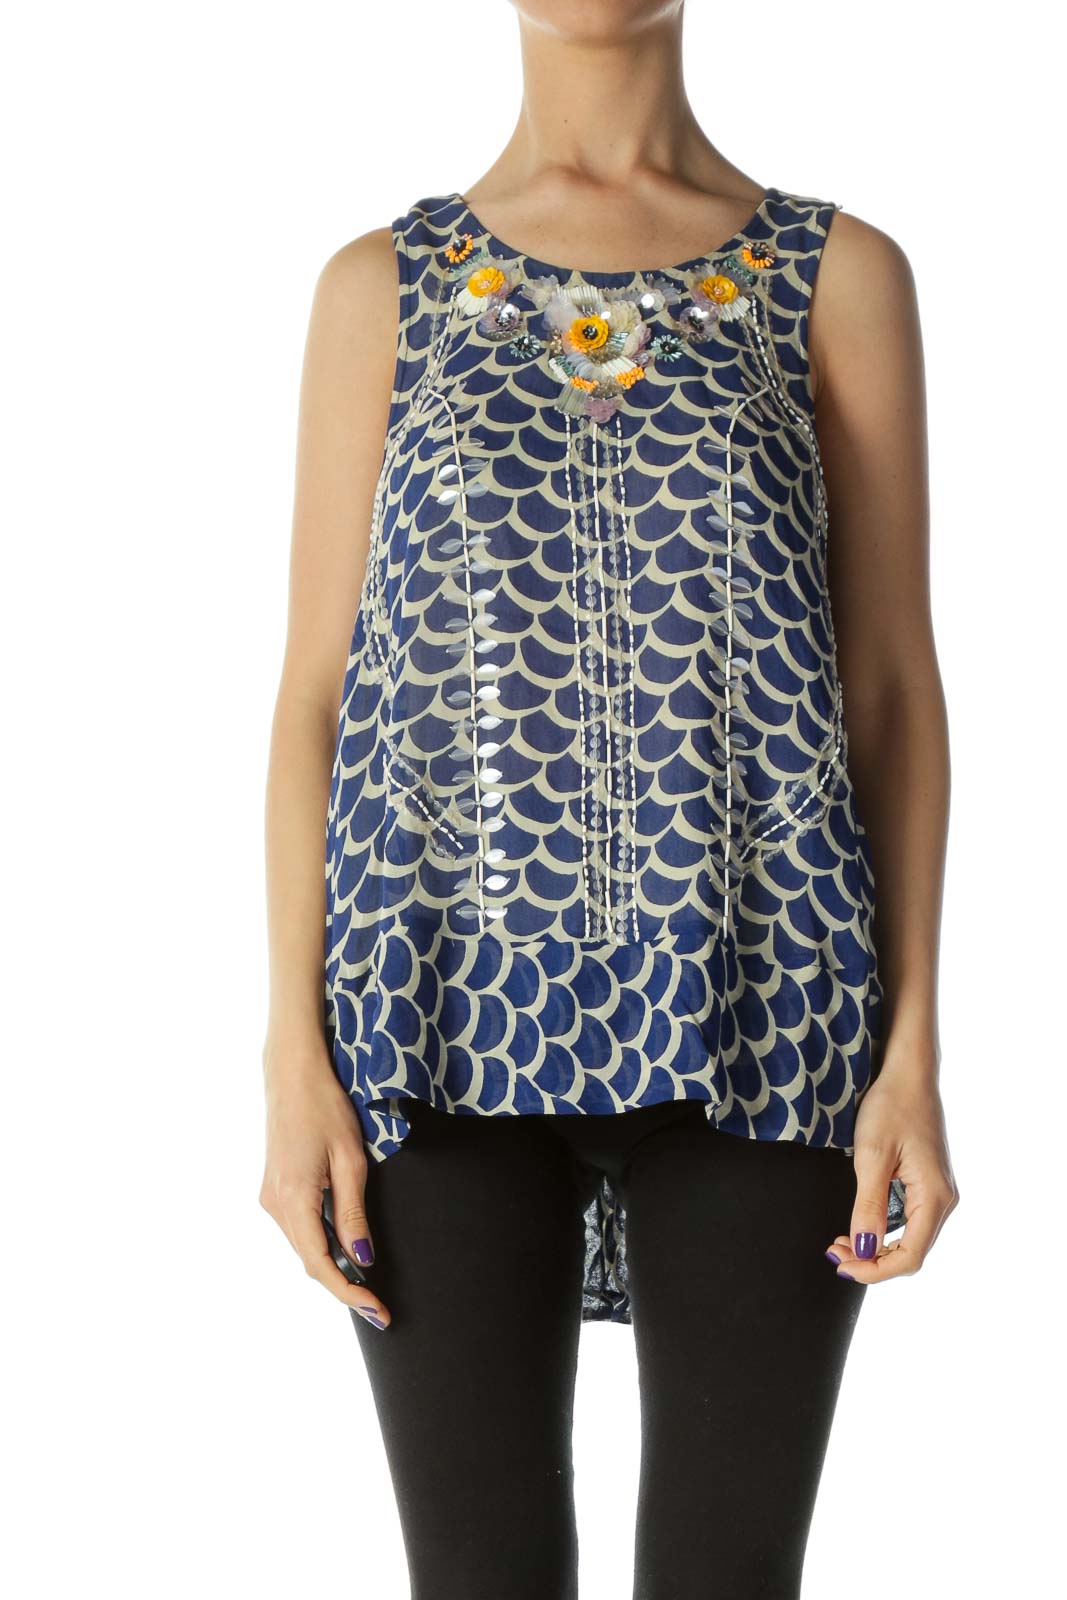 Blue Floral Sequinned Pattern Top Front